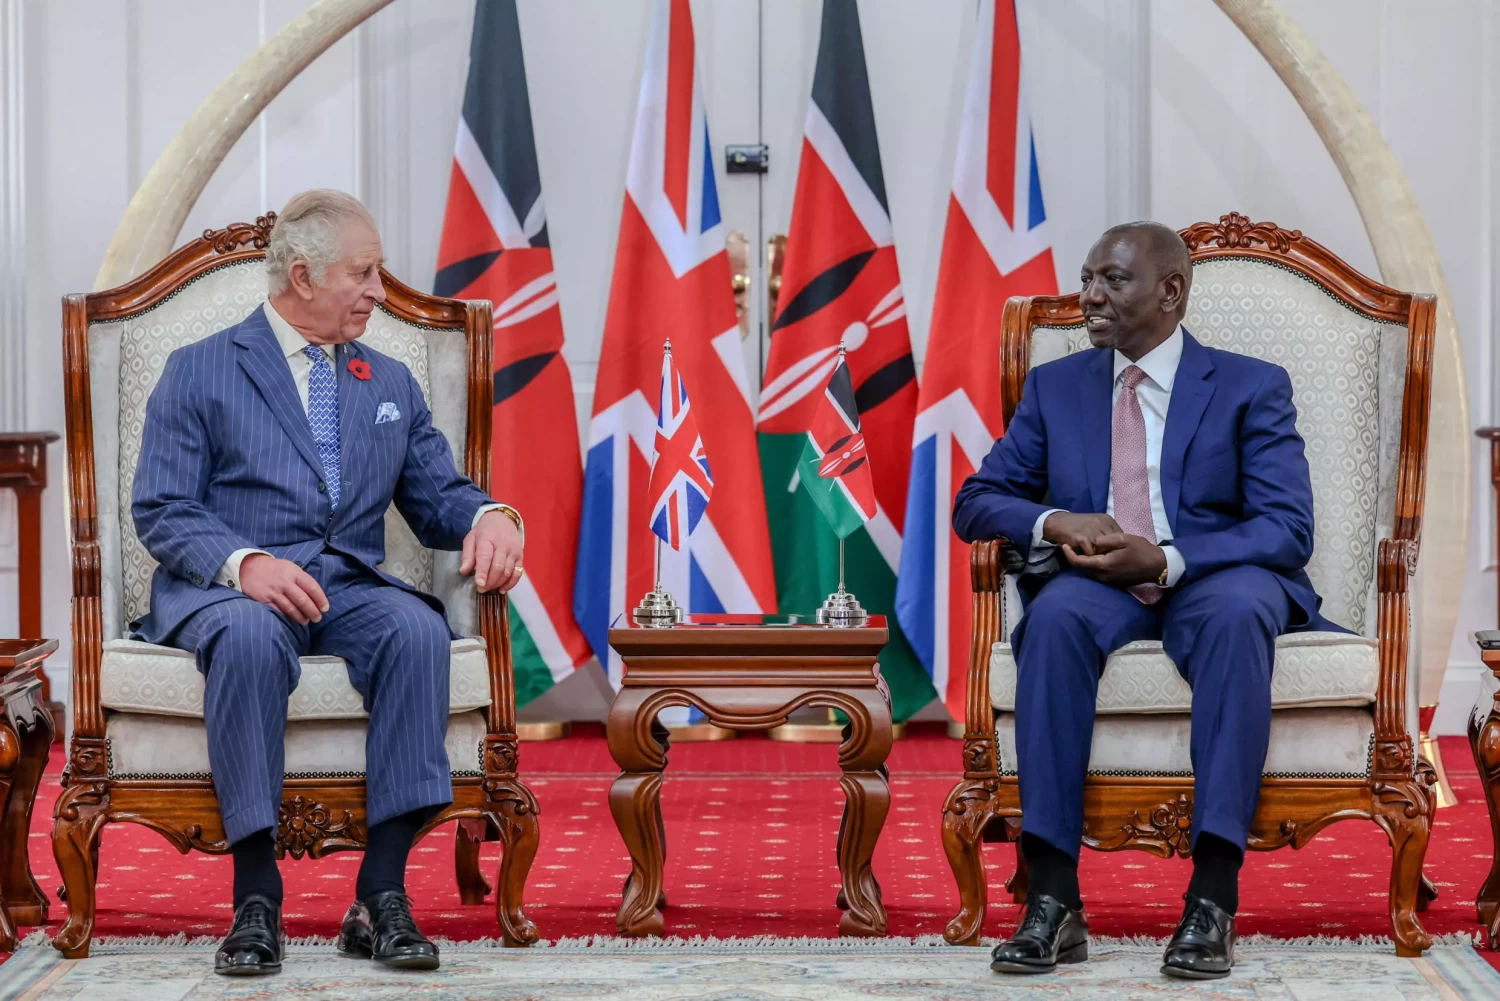 King Charles III says 'no excuse' for colonial atrocities during Kenya visit